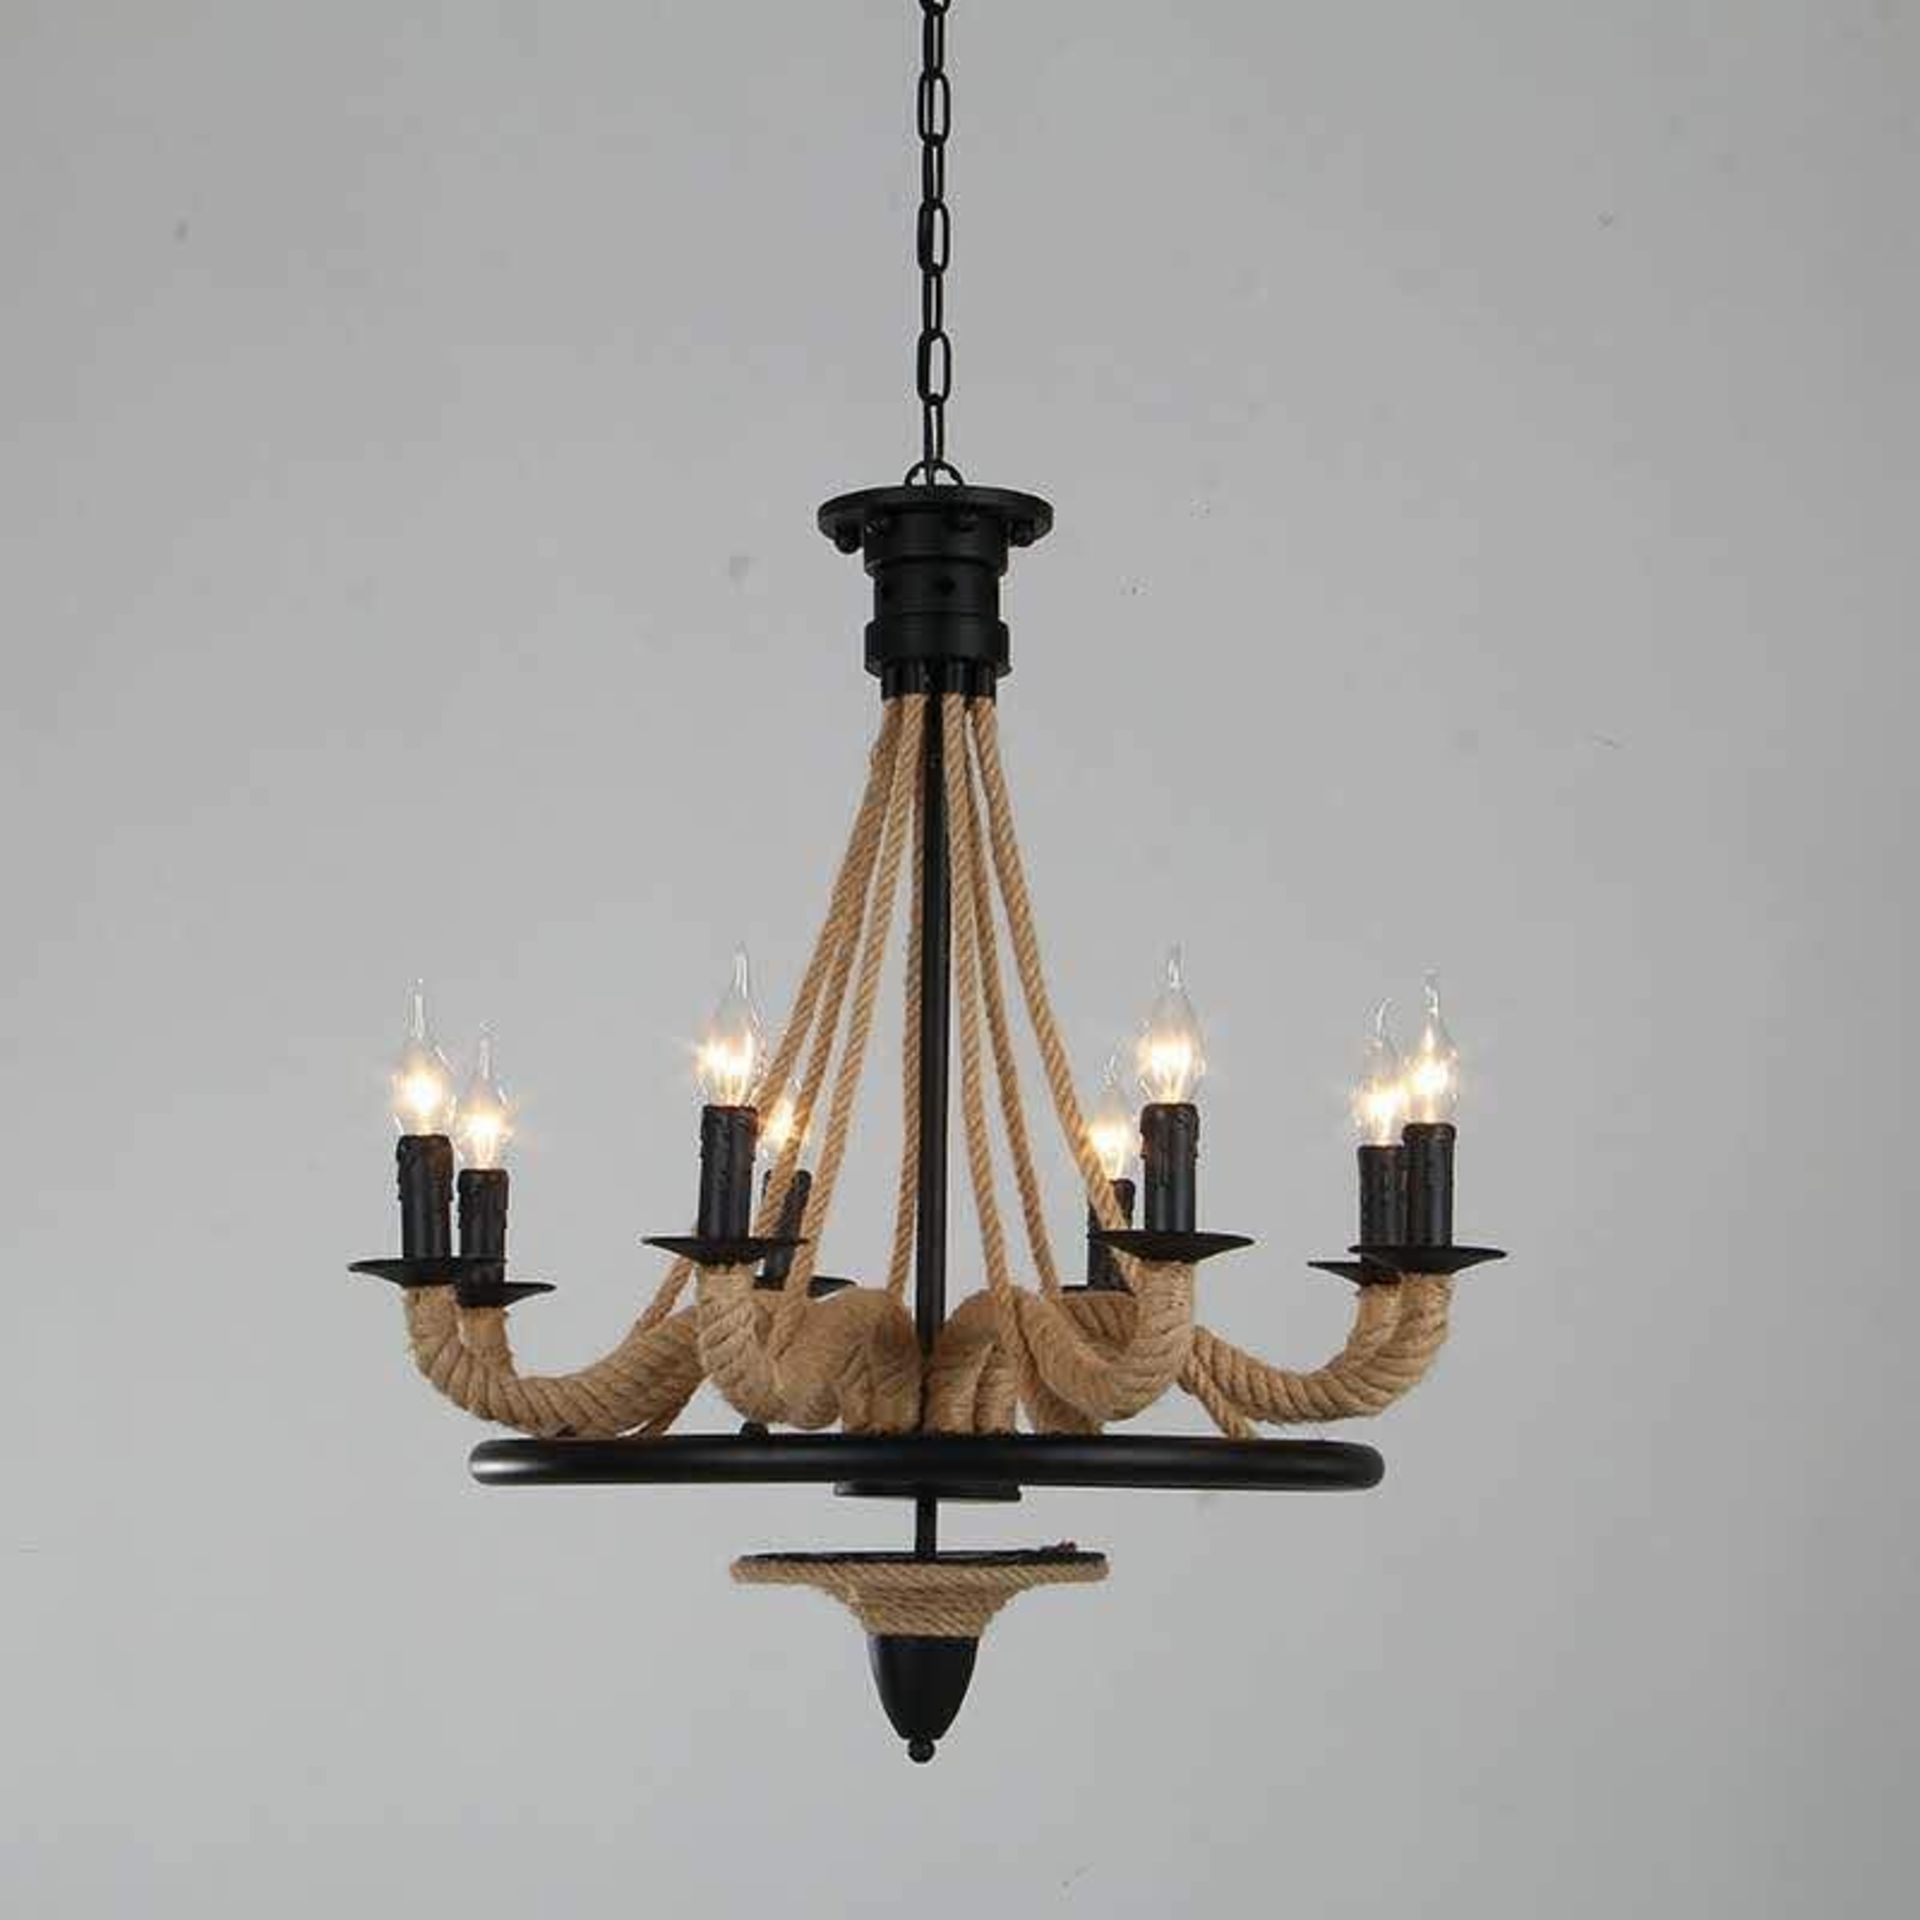 NEW Unique Vintage Style Retro Rope / Metal Chandelier (Bulbs NOT Included) - Image 4 of 6